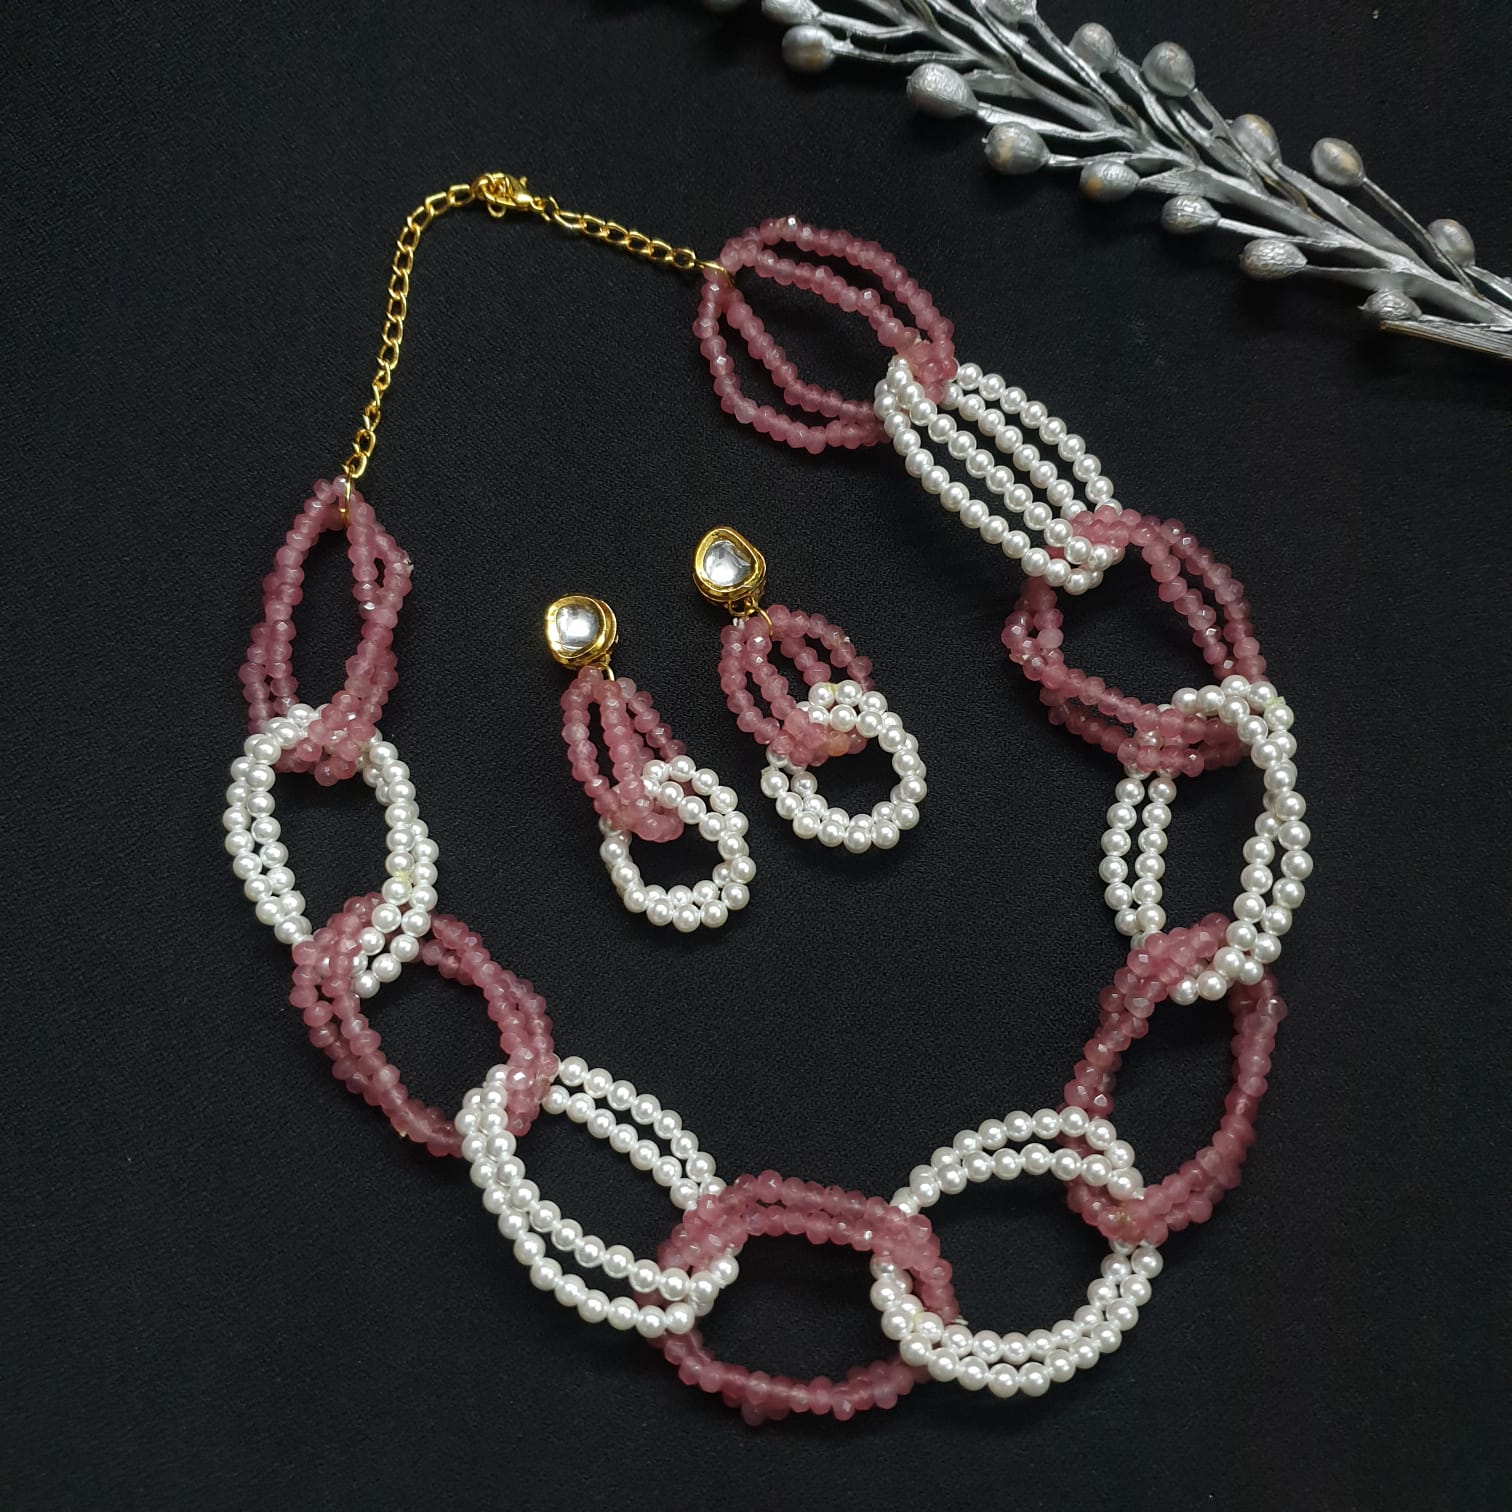 Pearl and Pink Stone Beads Designer Necklace With Earrings